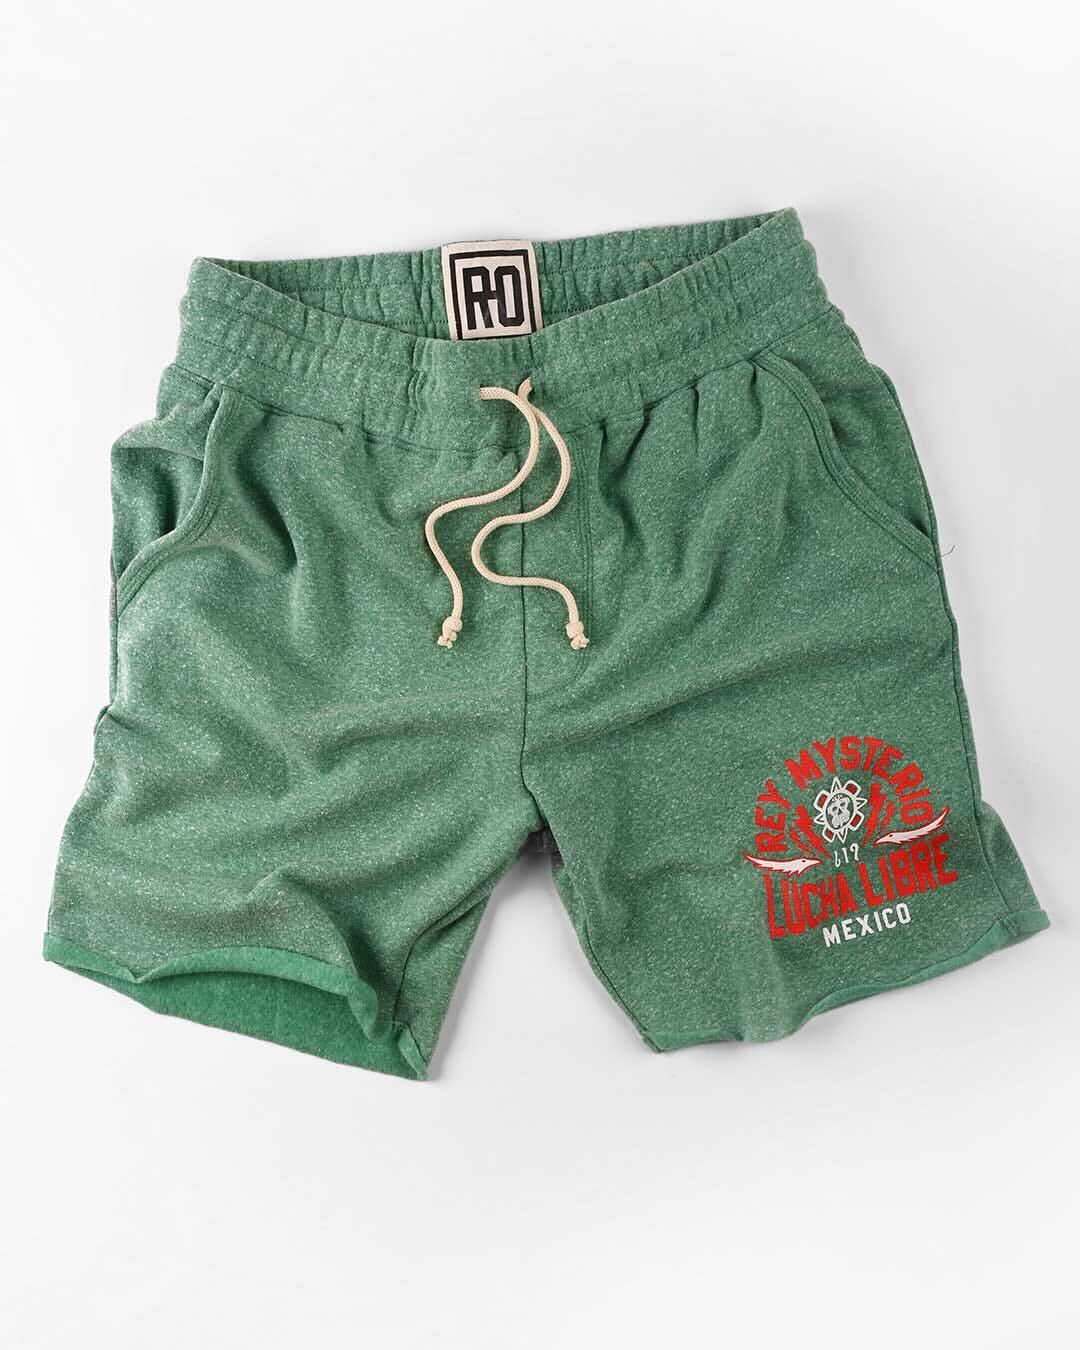 Rey Mysterio 619 Green Shorts - Roots of Fight